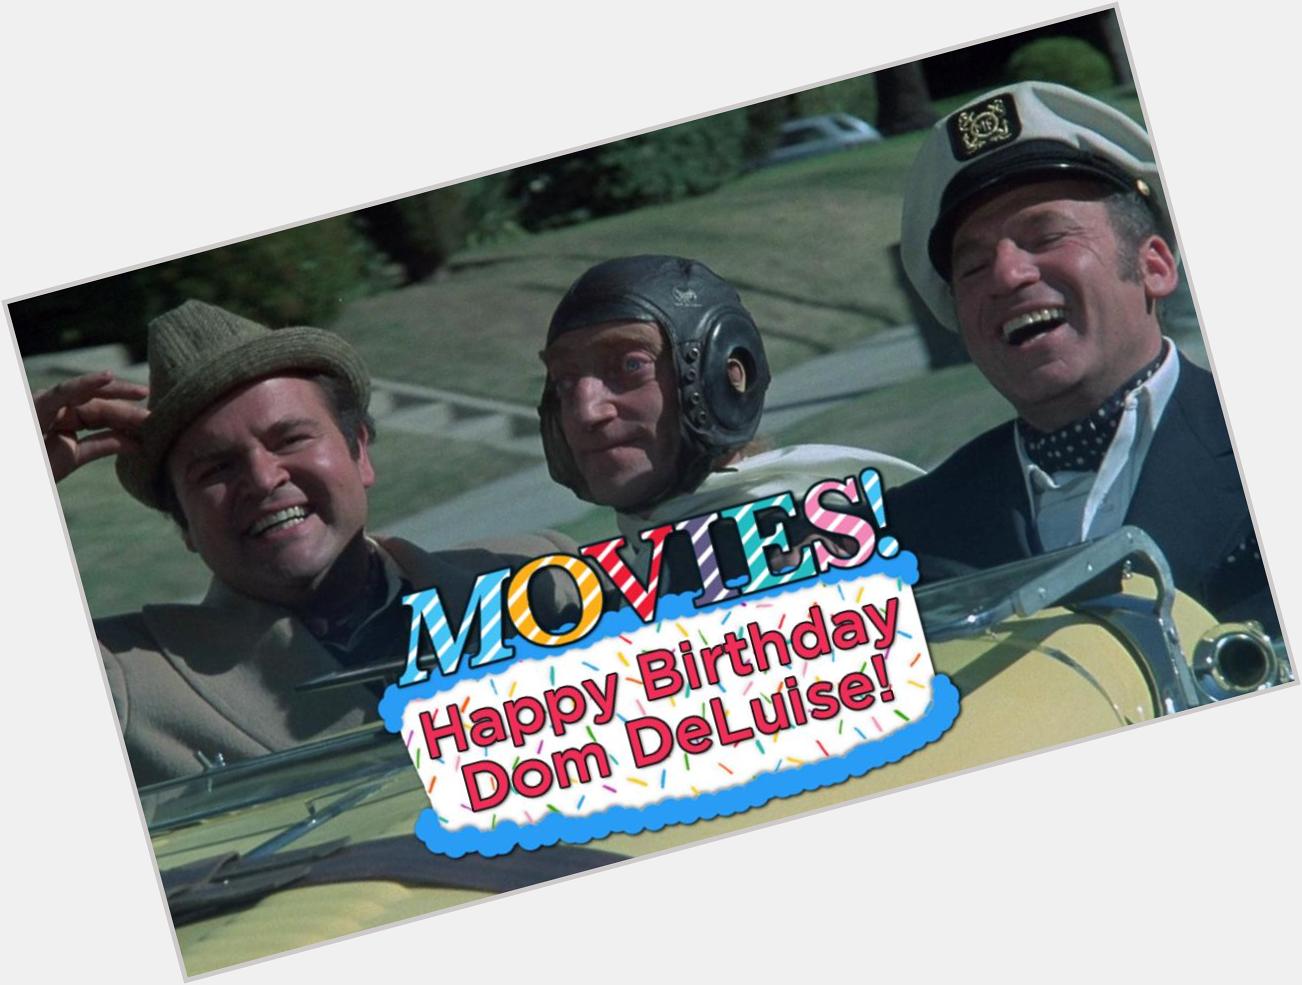 Happy Birthday Dom DeLuise!

Don\t forget to see \"Silent Movie\" this month! 